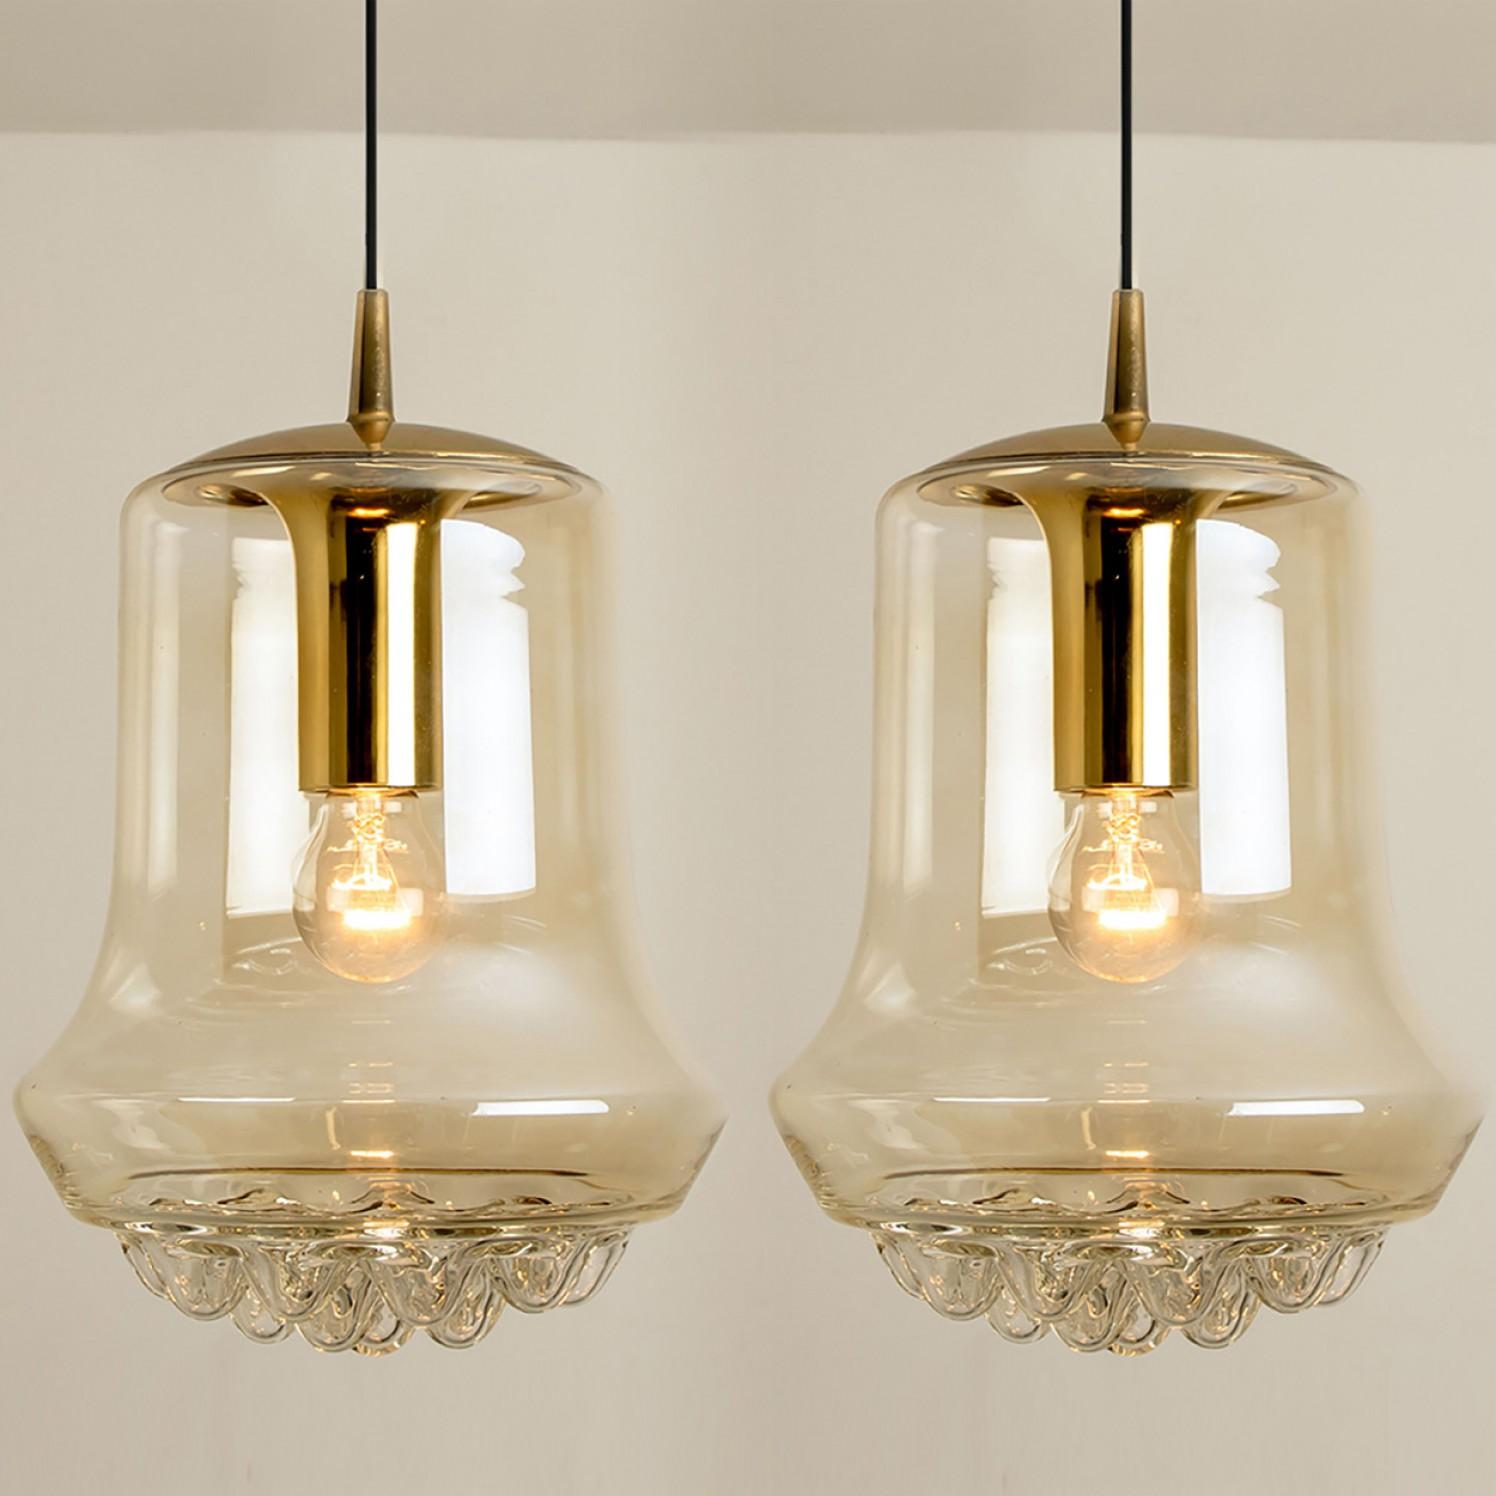 Pair of smoked golden/brown pendant lights, 1960s by Peill and Putzler in Germany, Europe. A unique shape and a wonderful light effect due to lovely glass elements. High quality pieces. Illuminates beautiful. True craftsmanship of the 20th